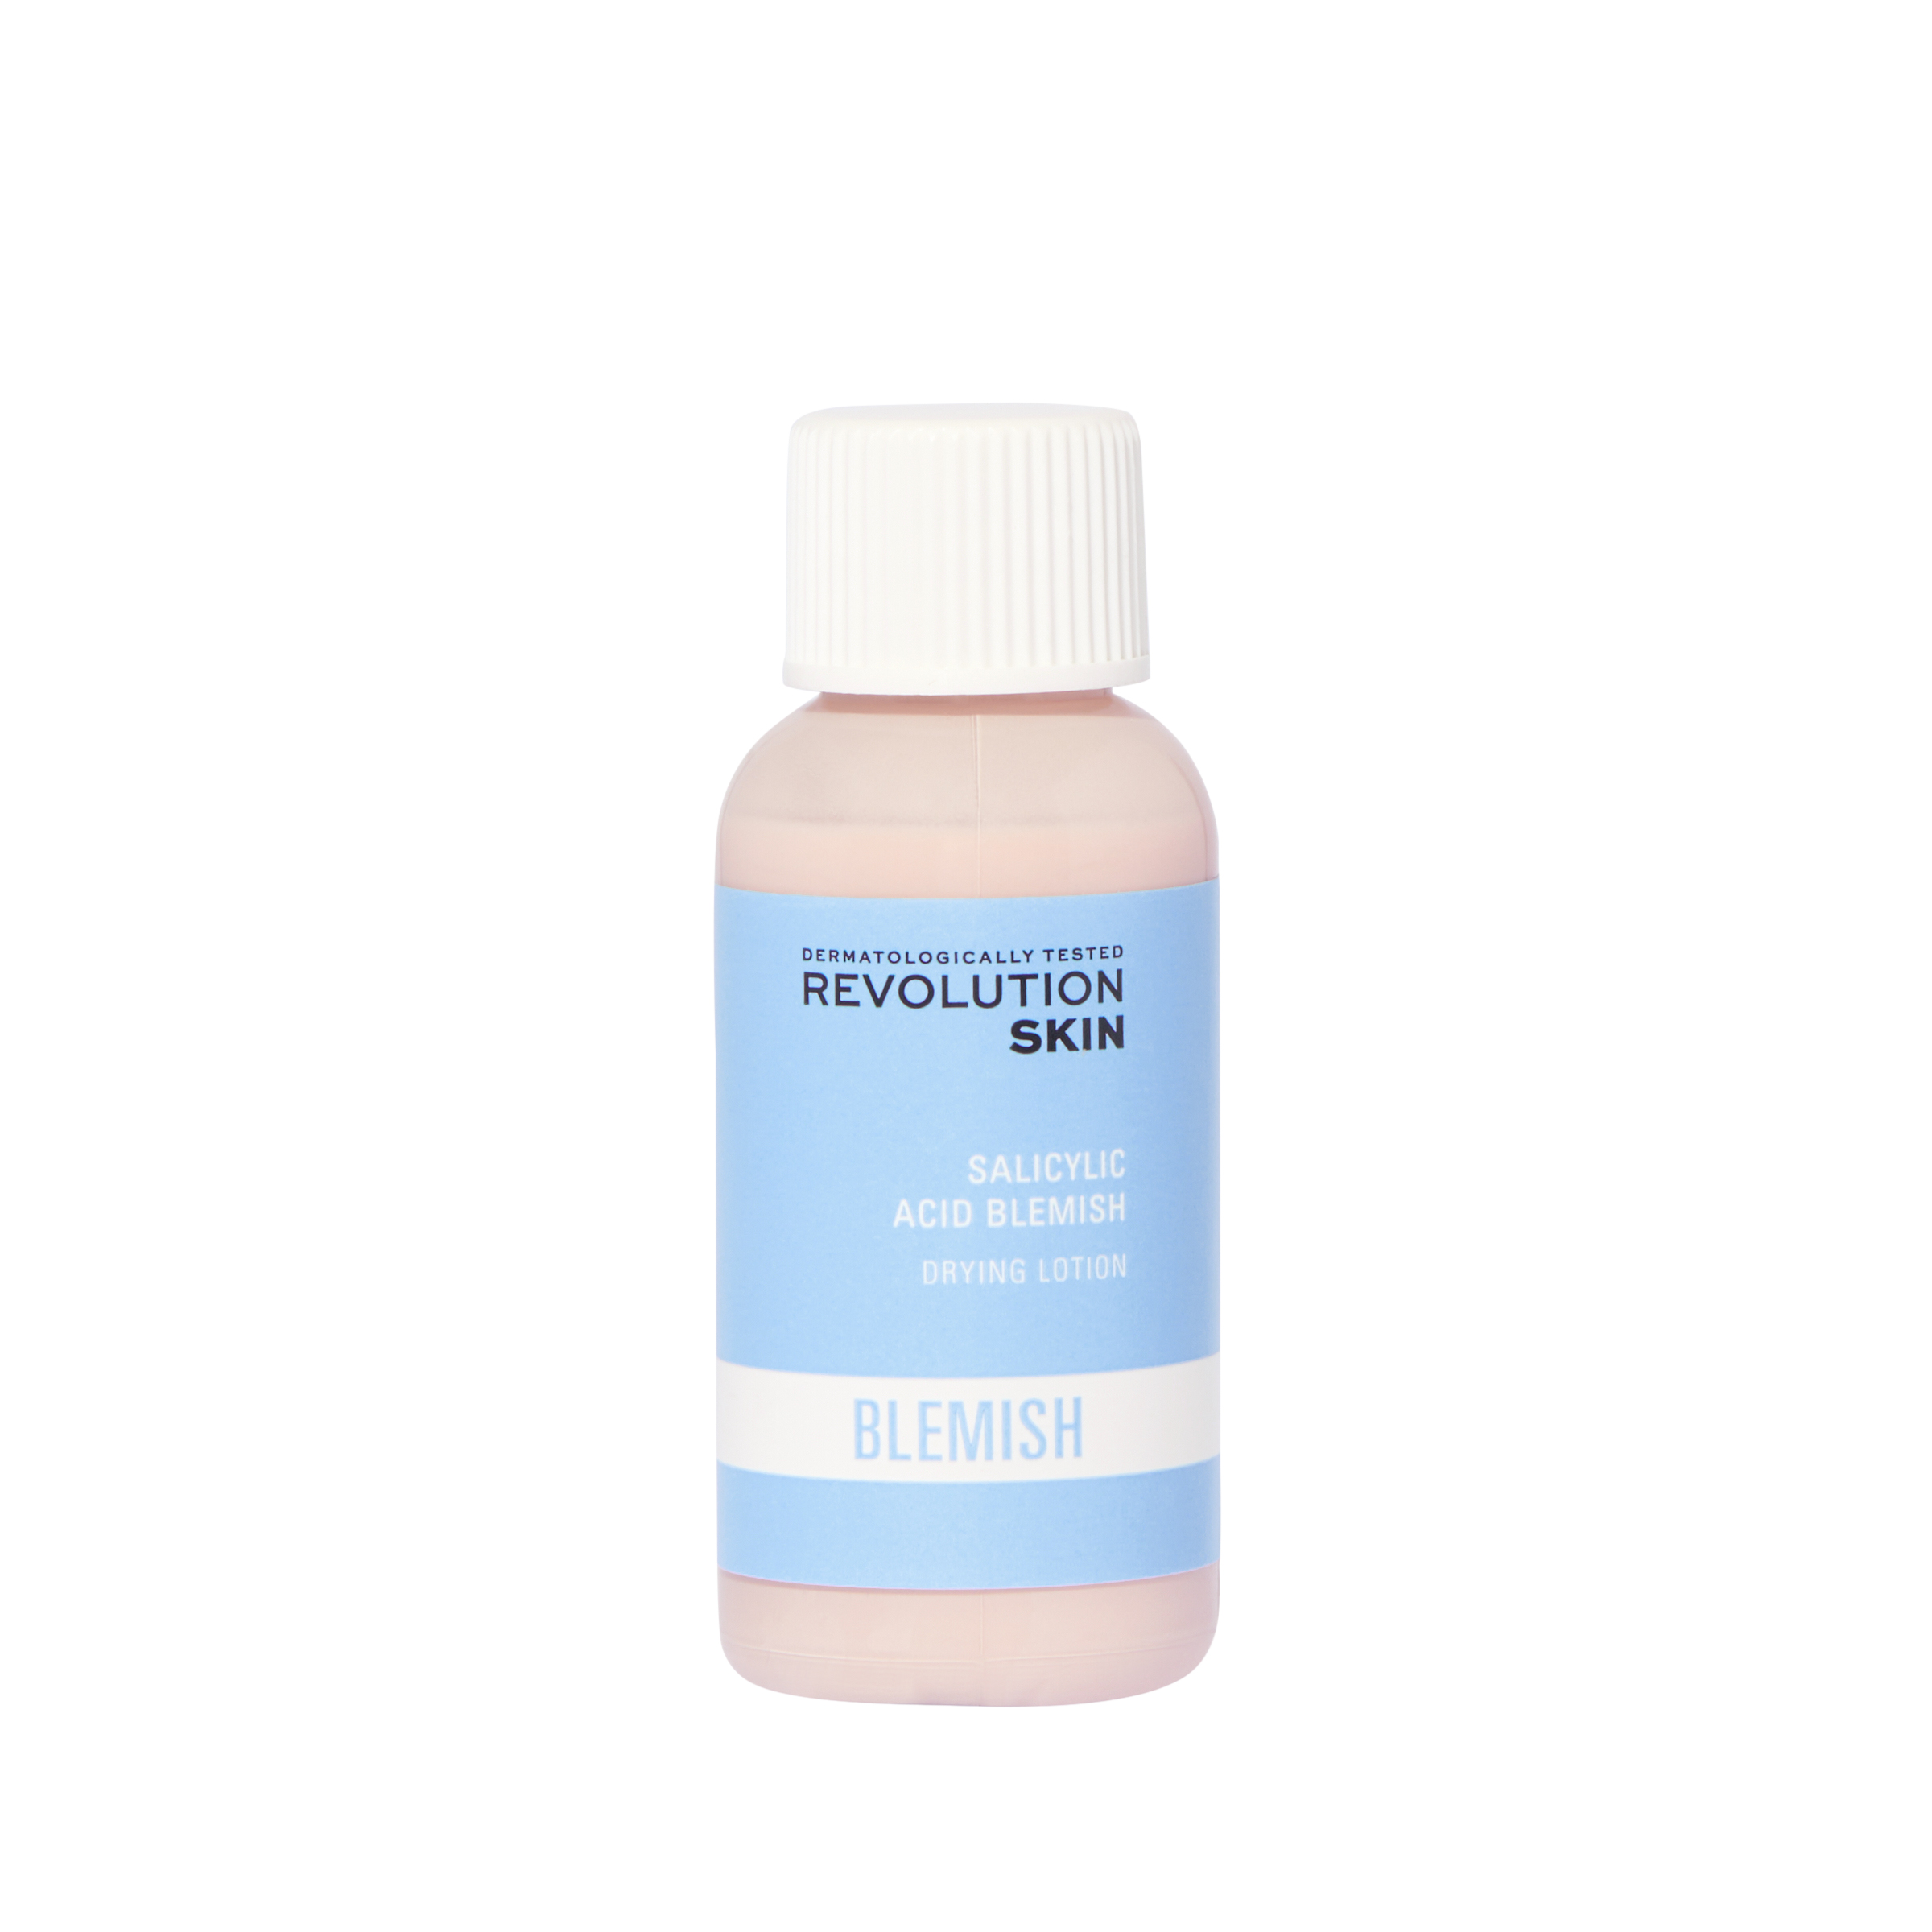 Overnight Targeted Blemish Lotion